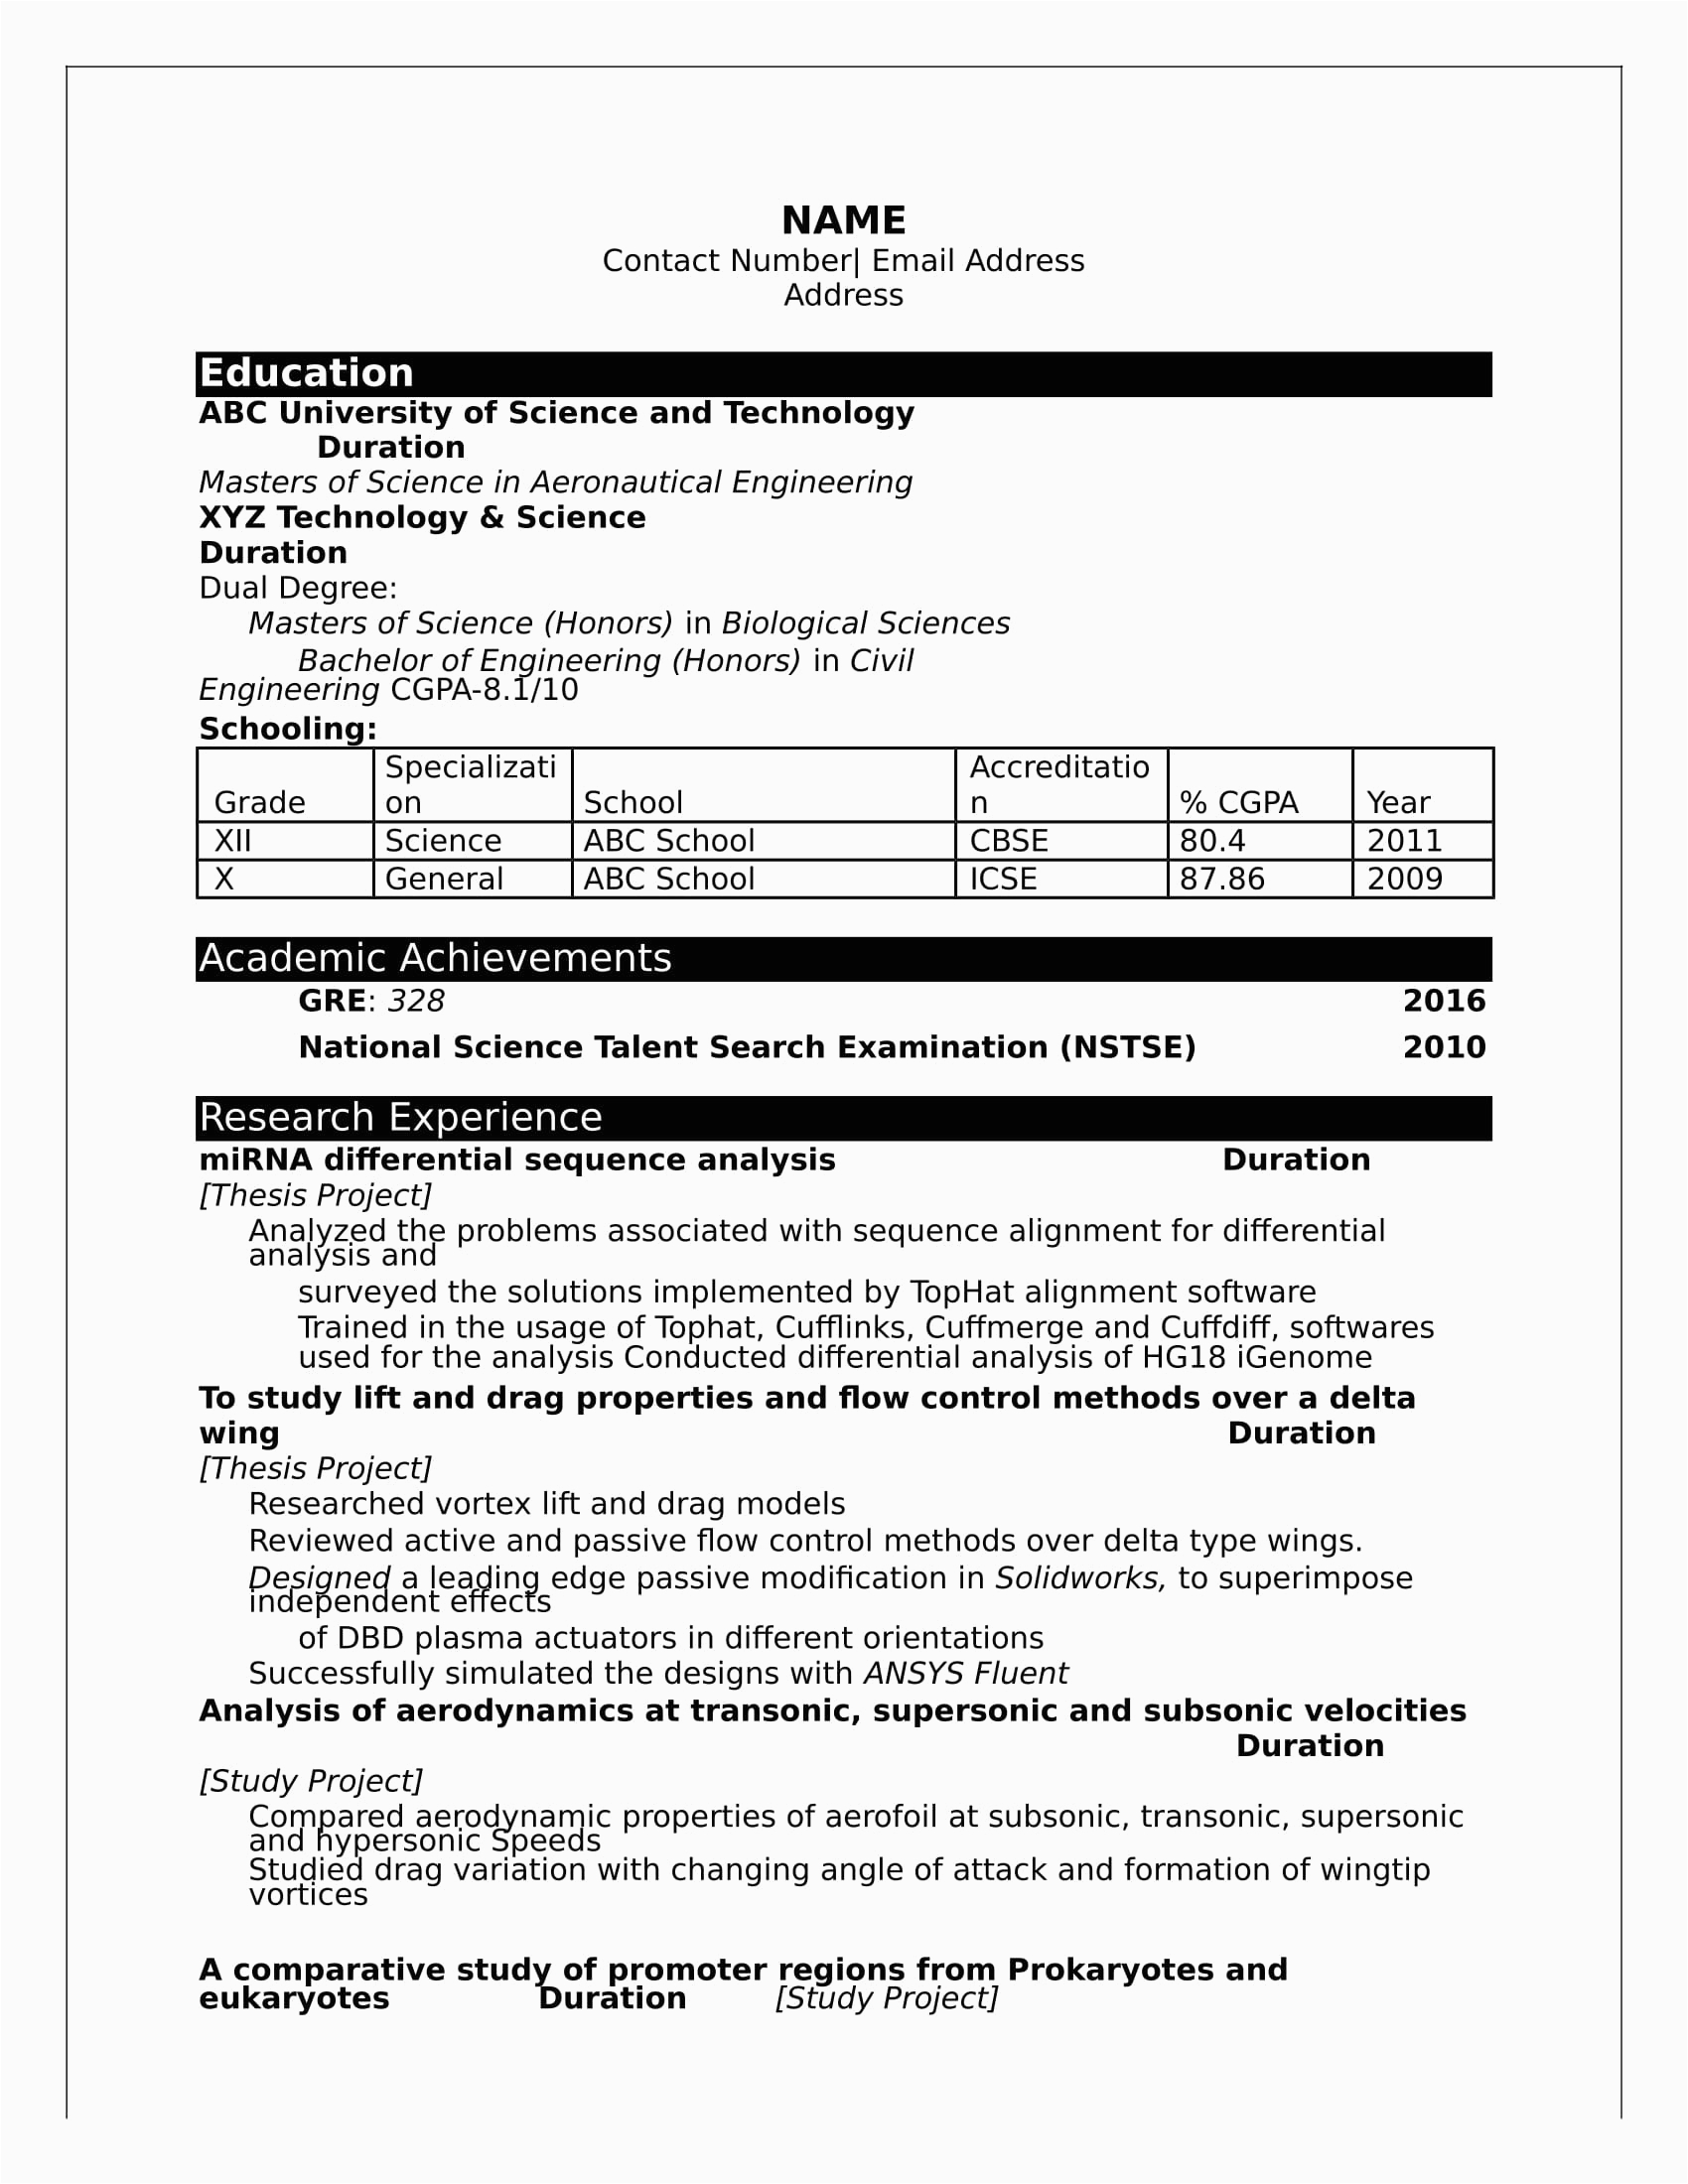 Professional Resume Templates for Freshers Free Download Best Resume format for Freshers Puter Engineers